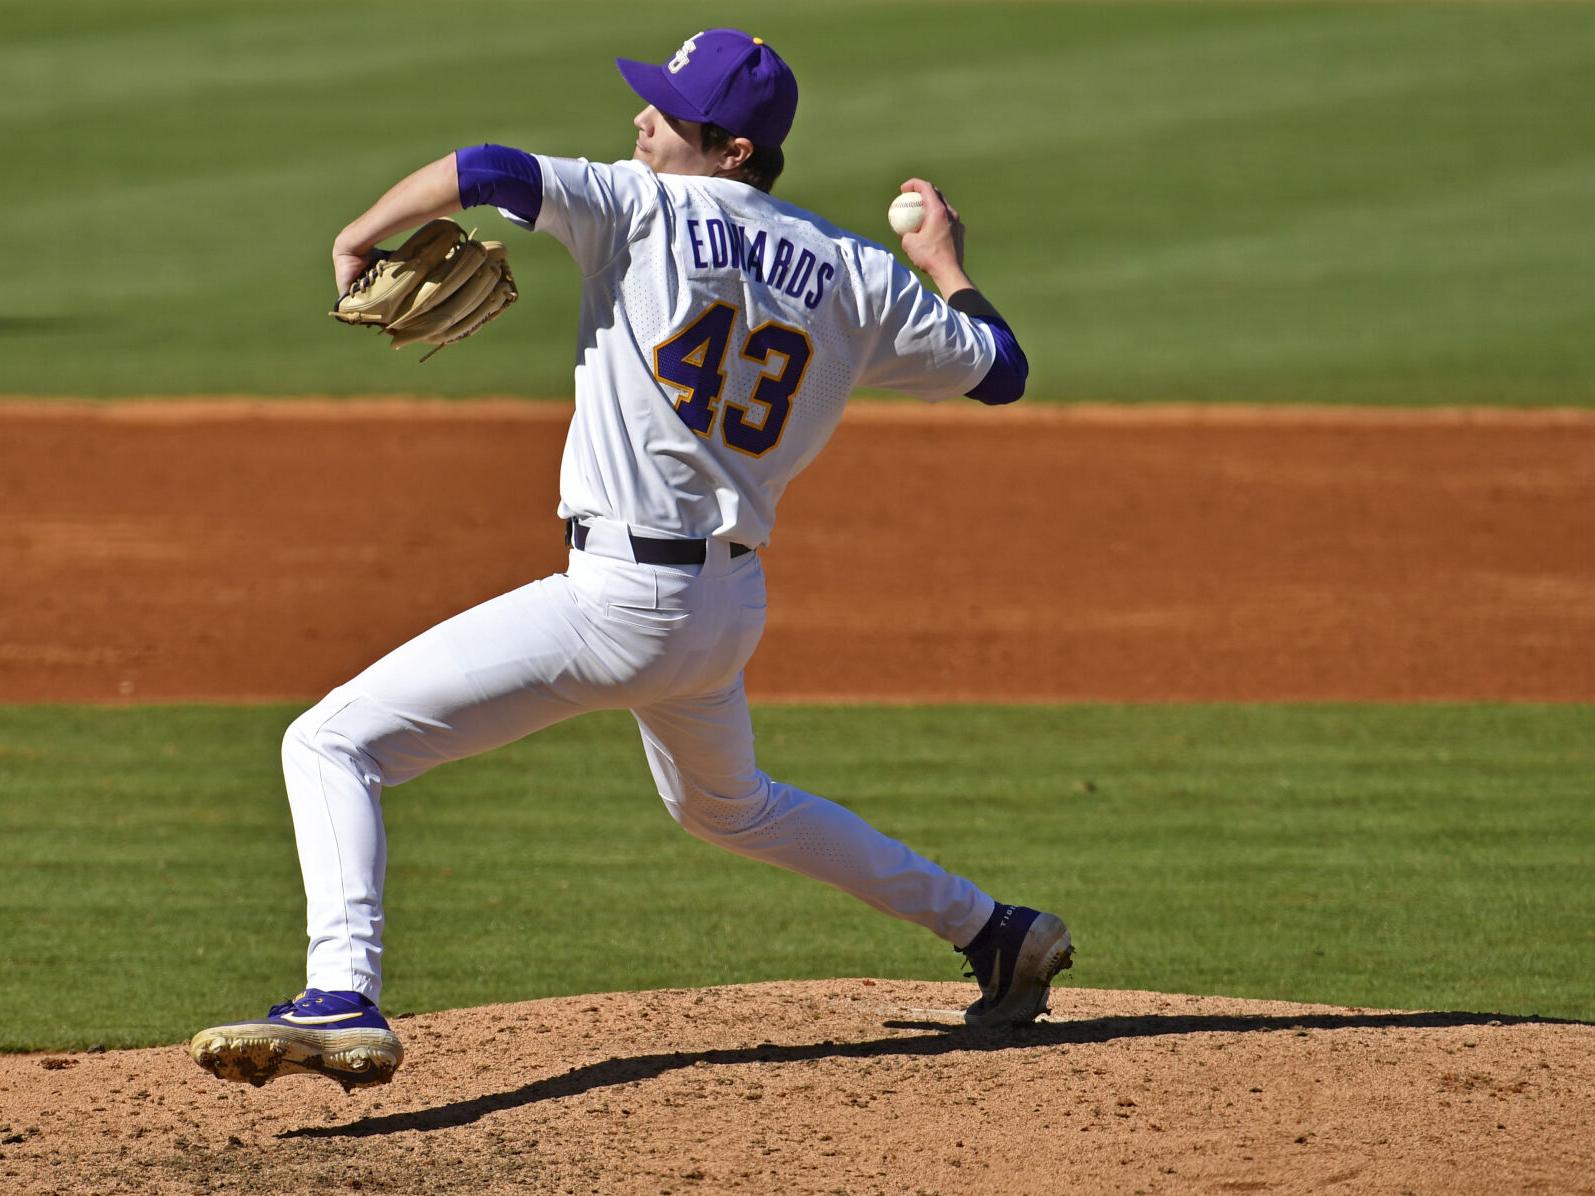 Before he started for LSU, pitcher Garrett Edwards had a prolific basketball career | LSU | theadvocate.com